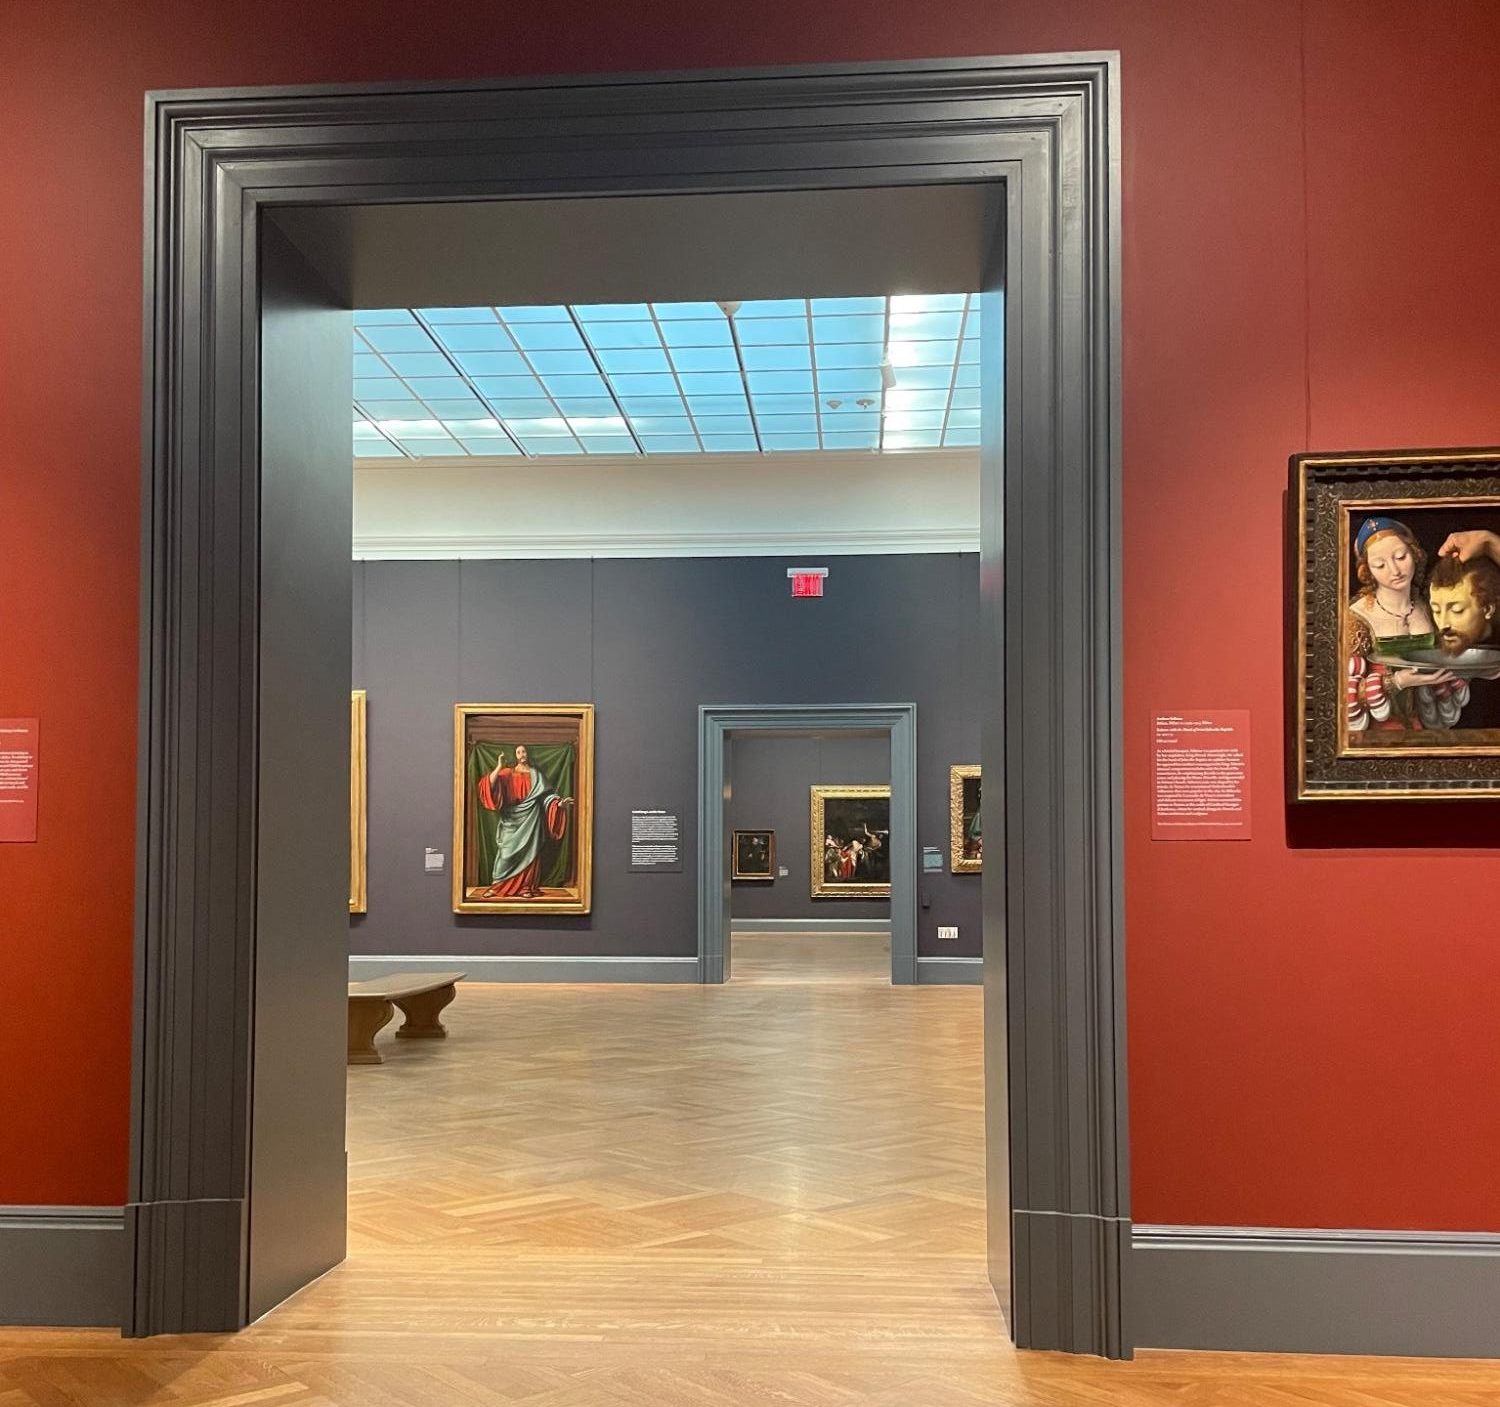  Increased illumination and new paint were some of the many alterations undertaken by curators during the renovation of the European galleries at the Metropolitan Museum of Art in Manhattan. 
